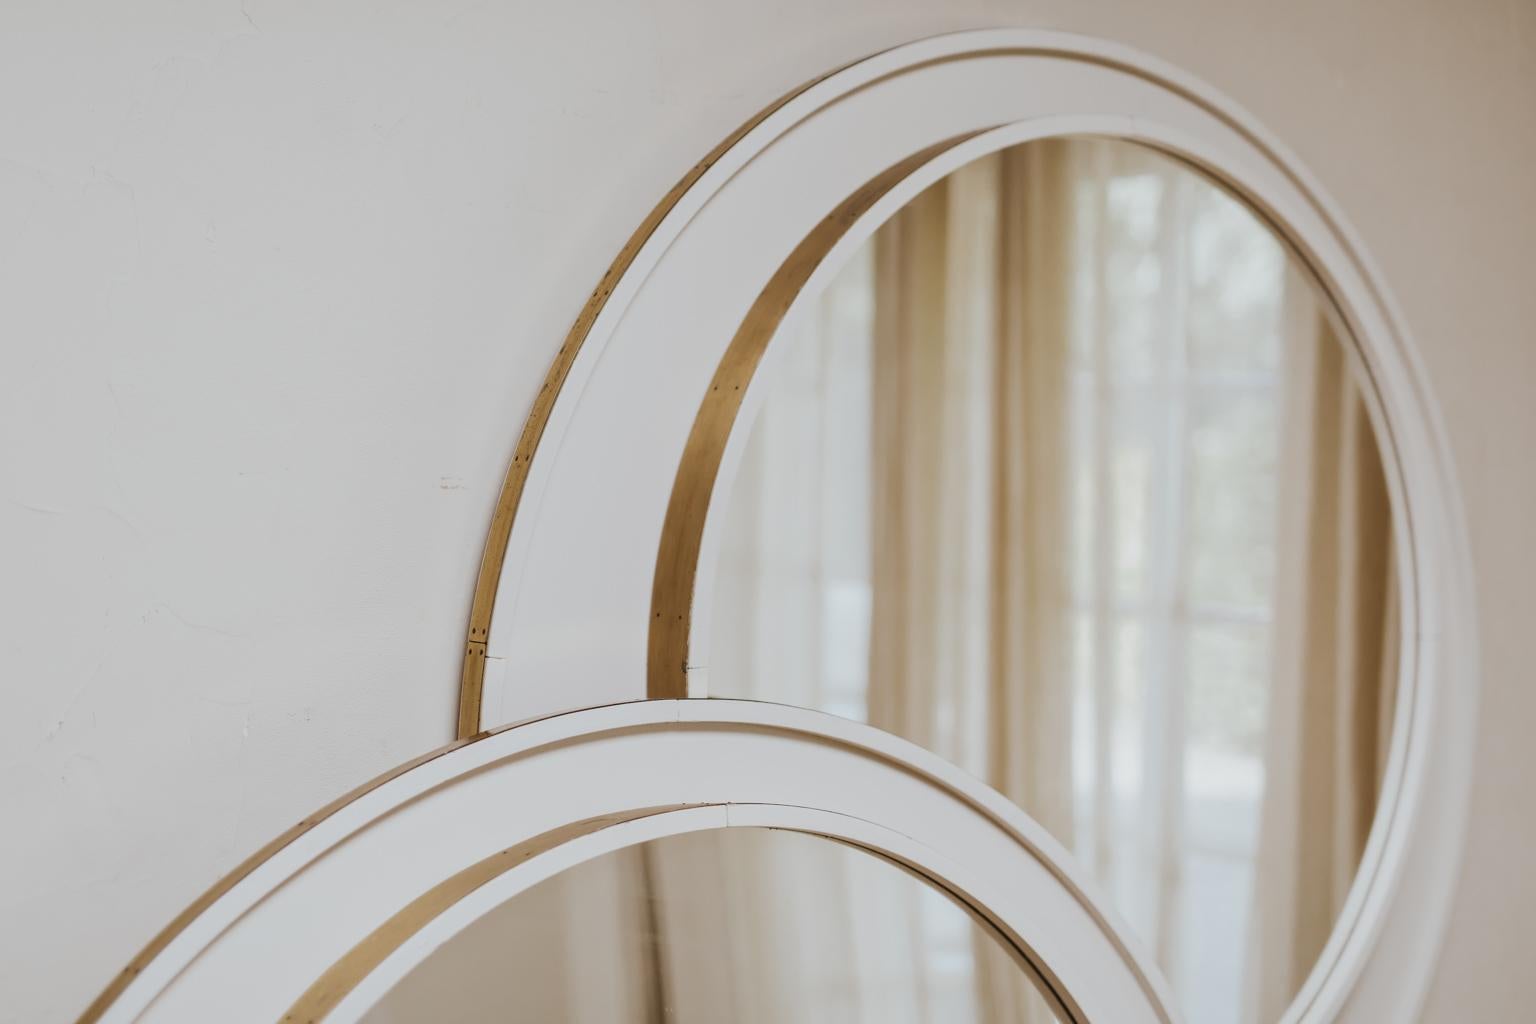 Had a big lot of these mirrors, all came out of a hotel in Berlin, Germany, made in the 1970s, very elegant. Measures: 132 cm diameter,
still 2 available, the others all found a new owner.